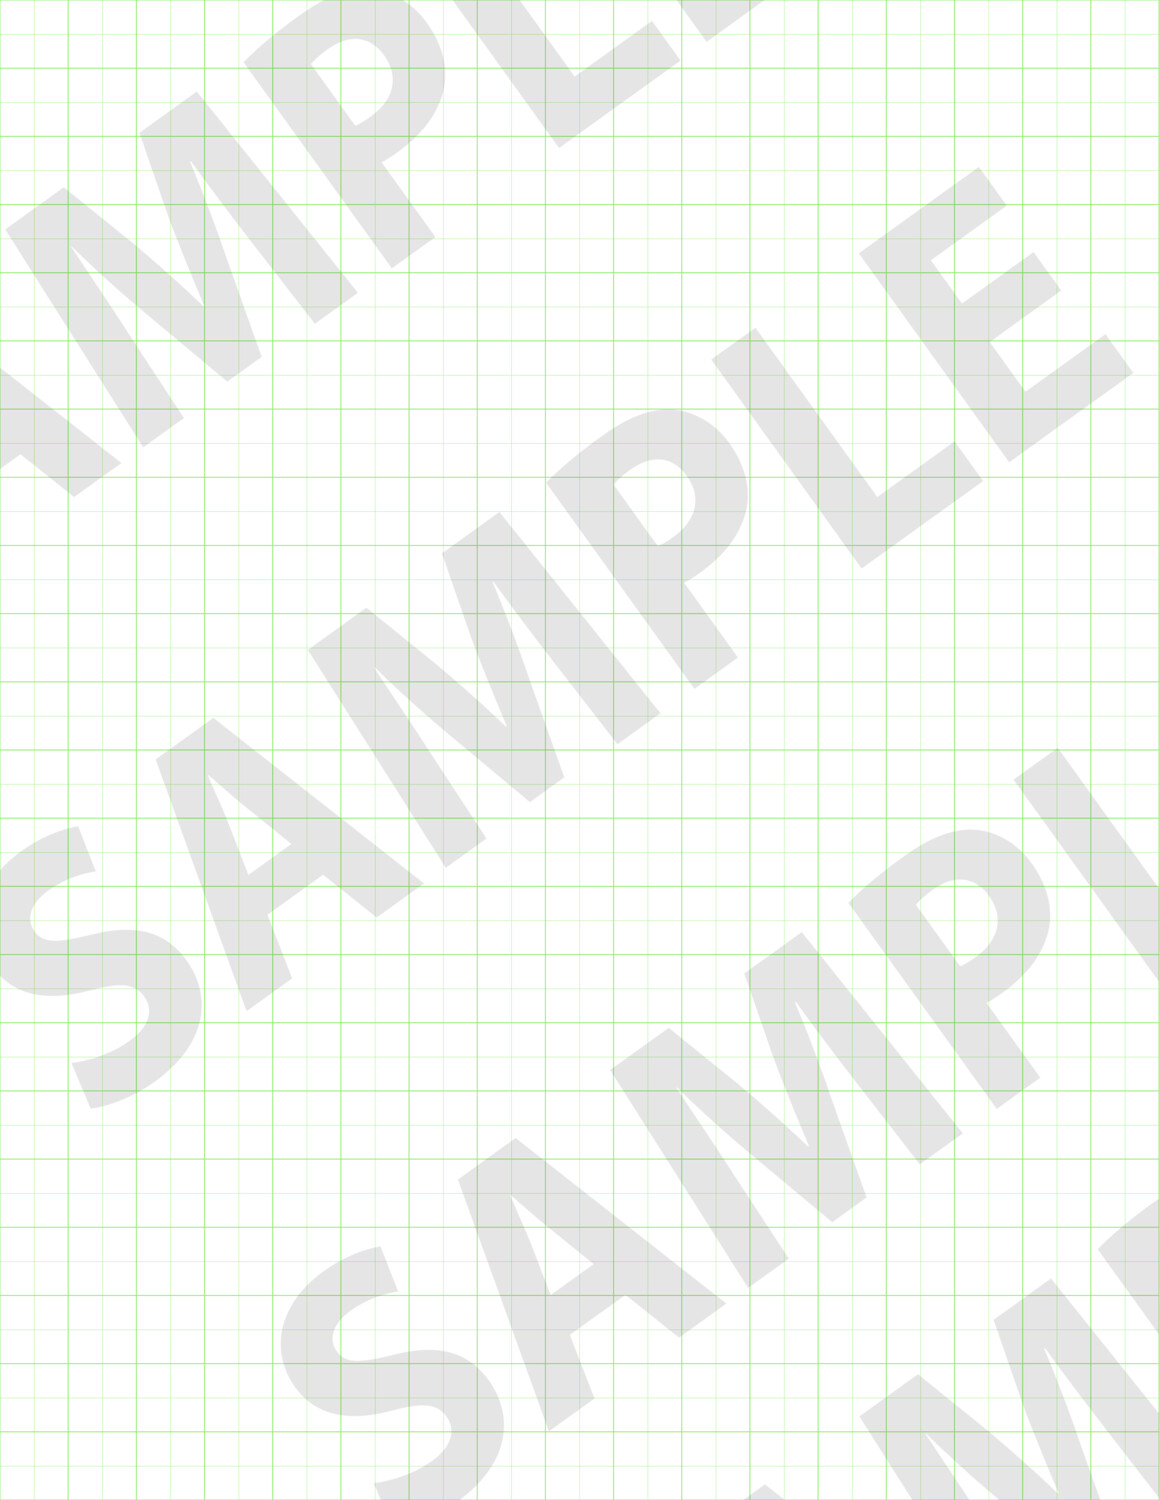 Green 1 - Large Grid Paper